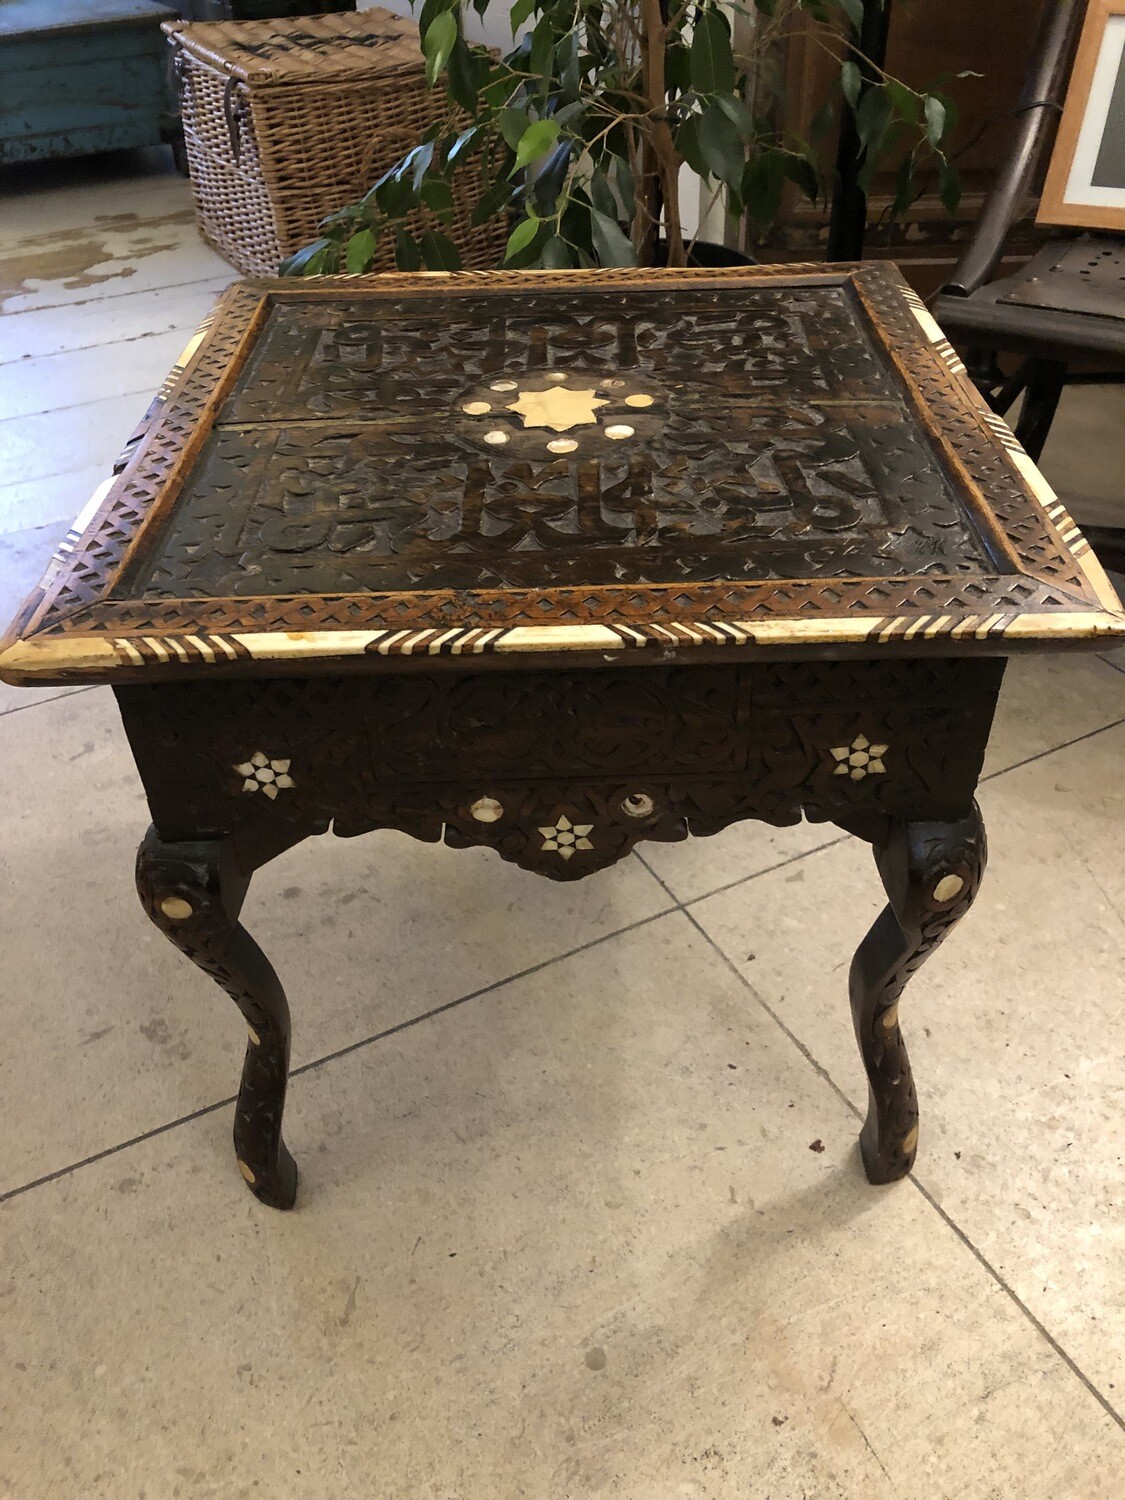 Beautiful Syrian 19th Century carved table with mother of pearl inlay